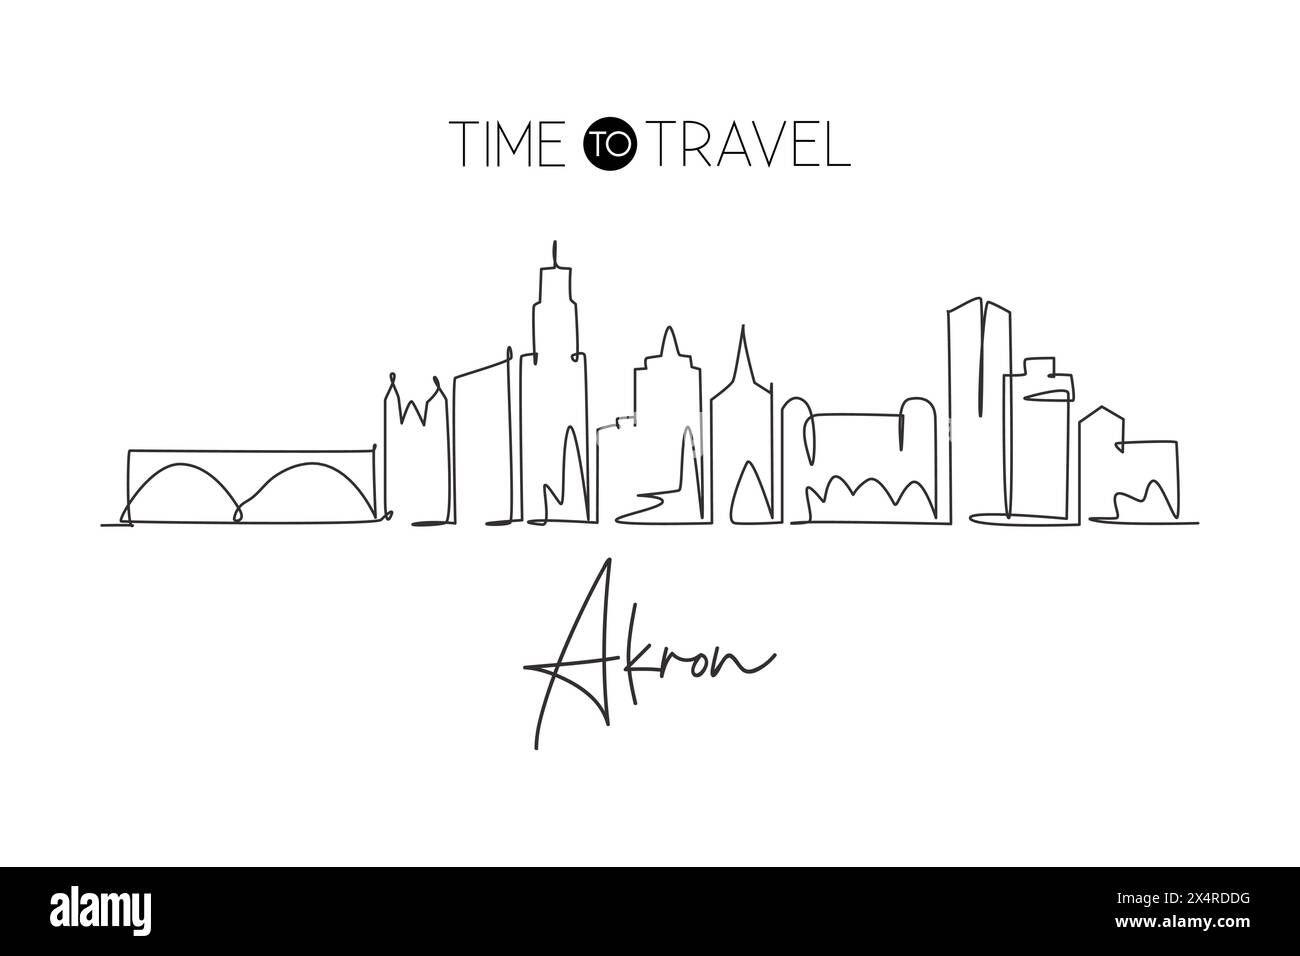 Single continuous line drawing Akron city skyline, Ohio. Famous city scraper landscape. World travel home wall decor art poster print concept. Modern Stock Vector